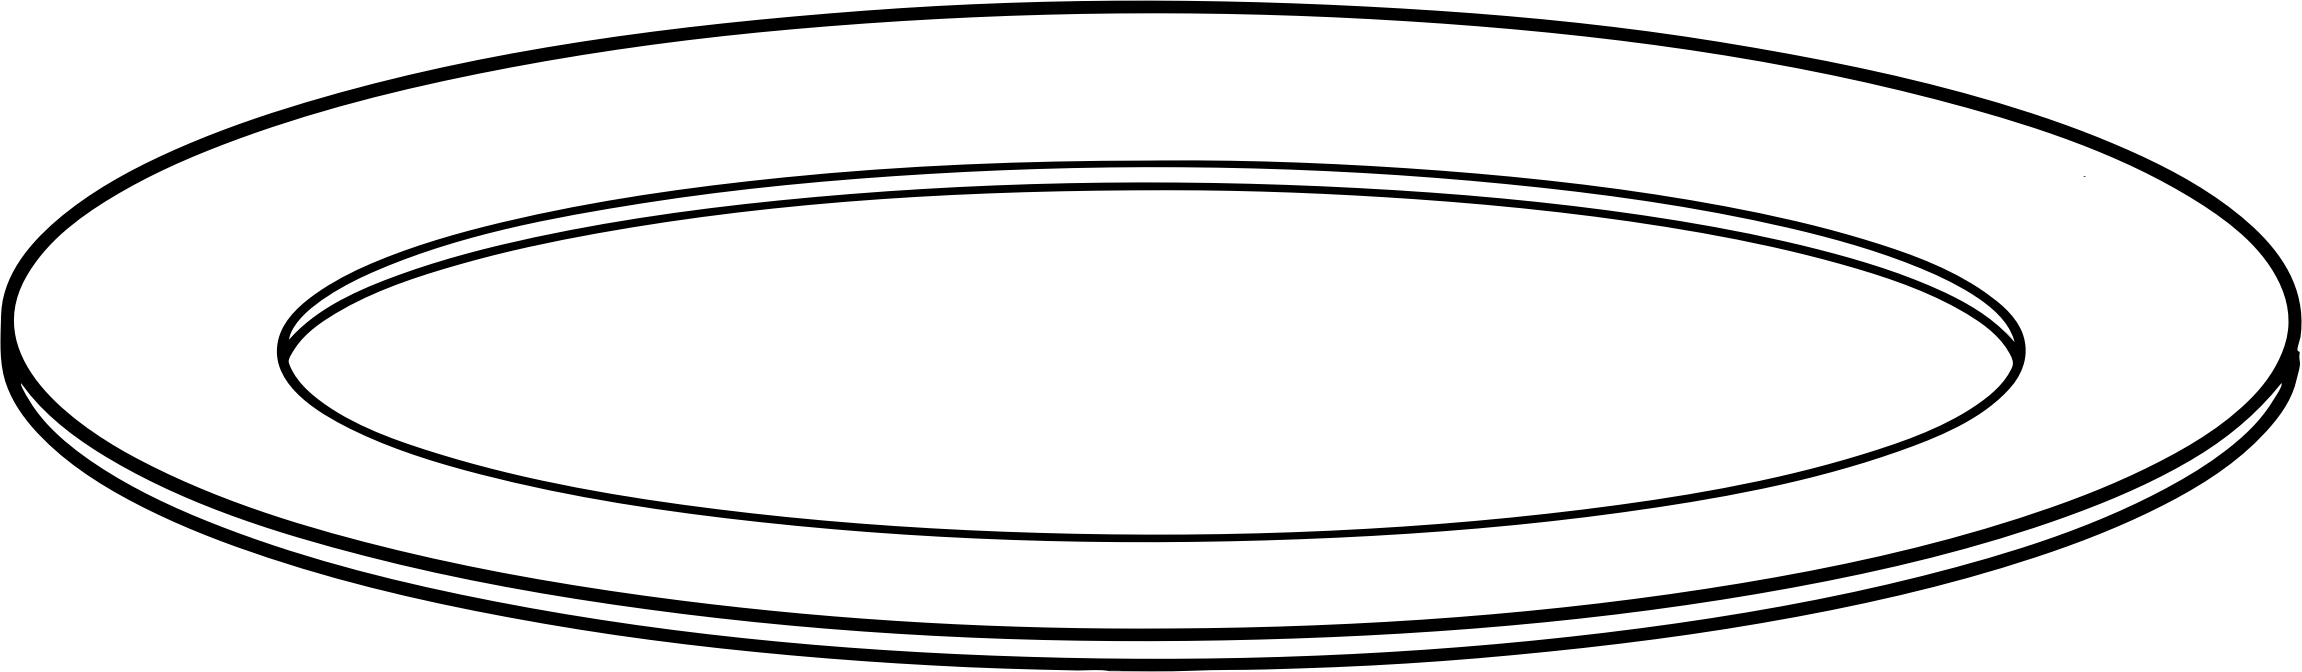 Plates clipart black and white